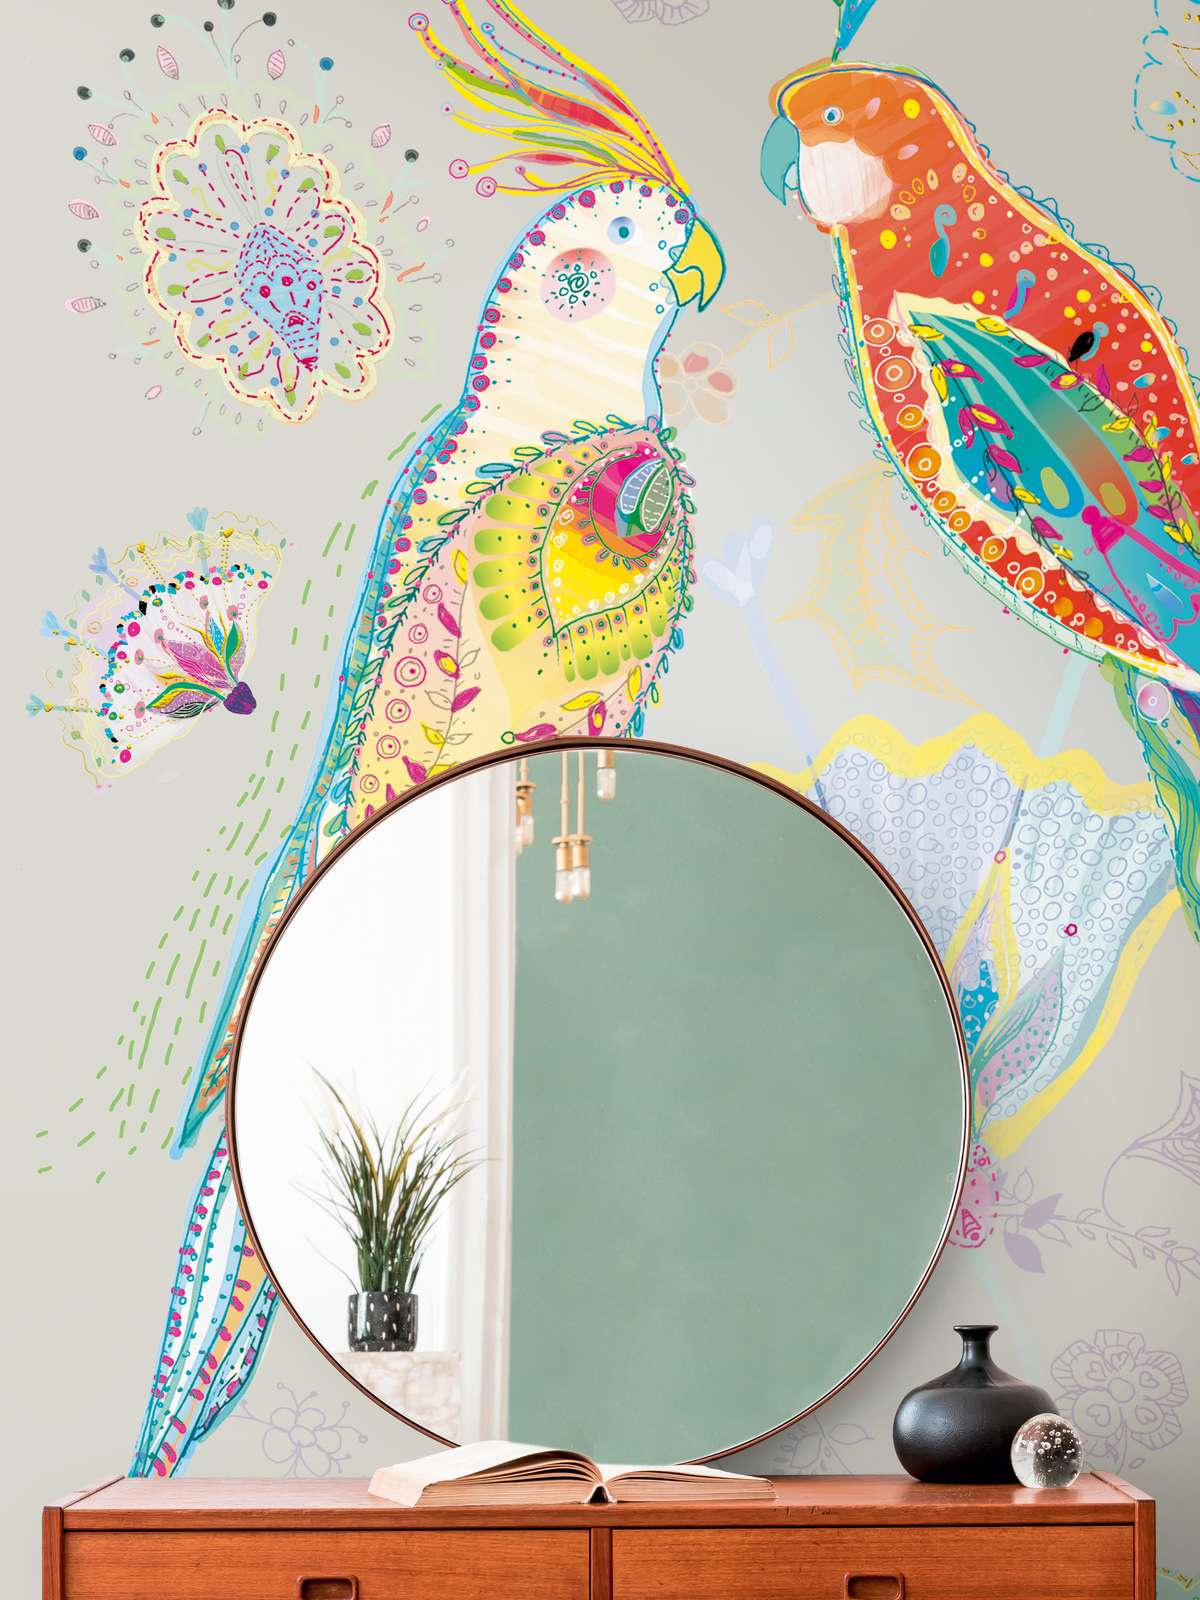             Non-woven wallpaper with parrot in floral style colourful - beige, colourful, green, blue, orange
        